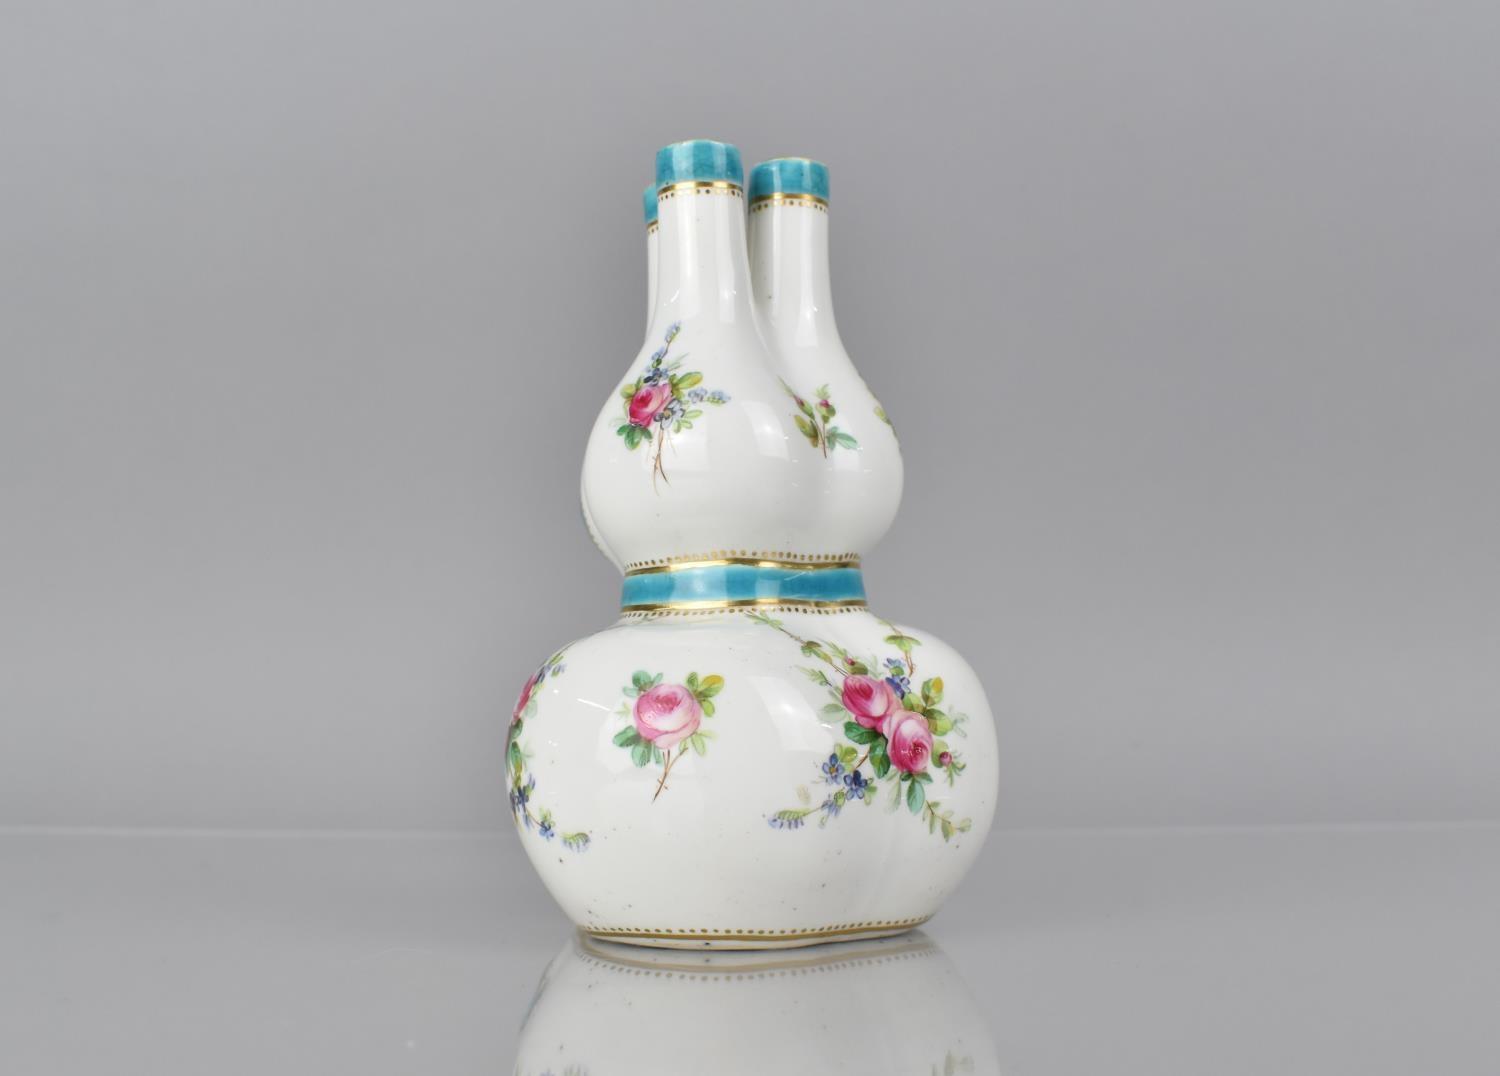 A 19th Century Porcelain Tulip Vase of Double Gourd Form with Tri Neck decorated with Rose Garland - Image 4 of 5